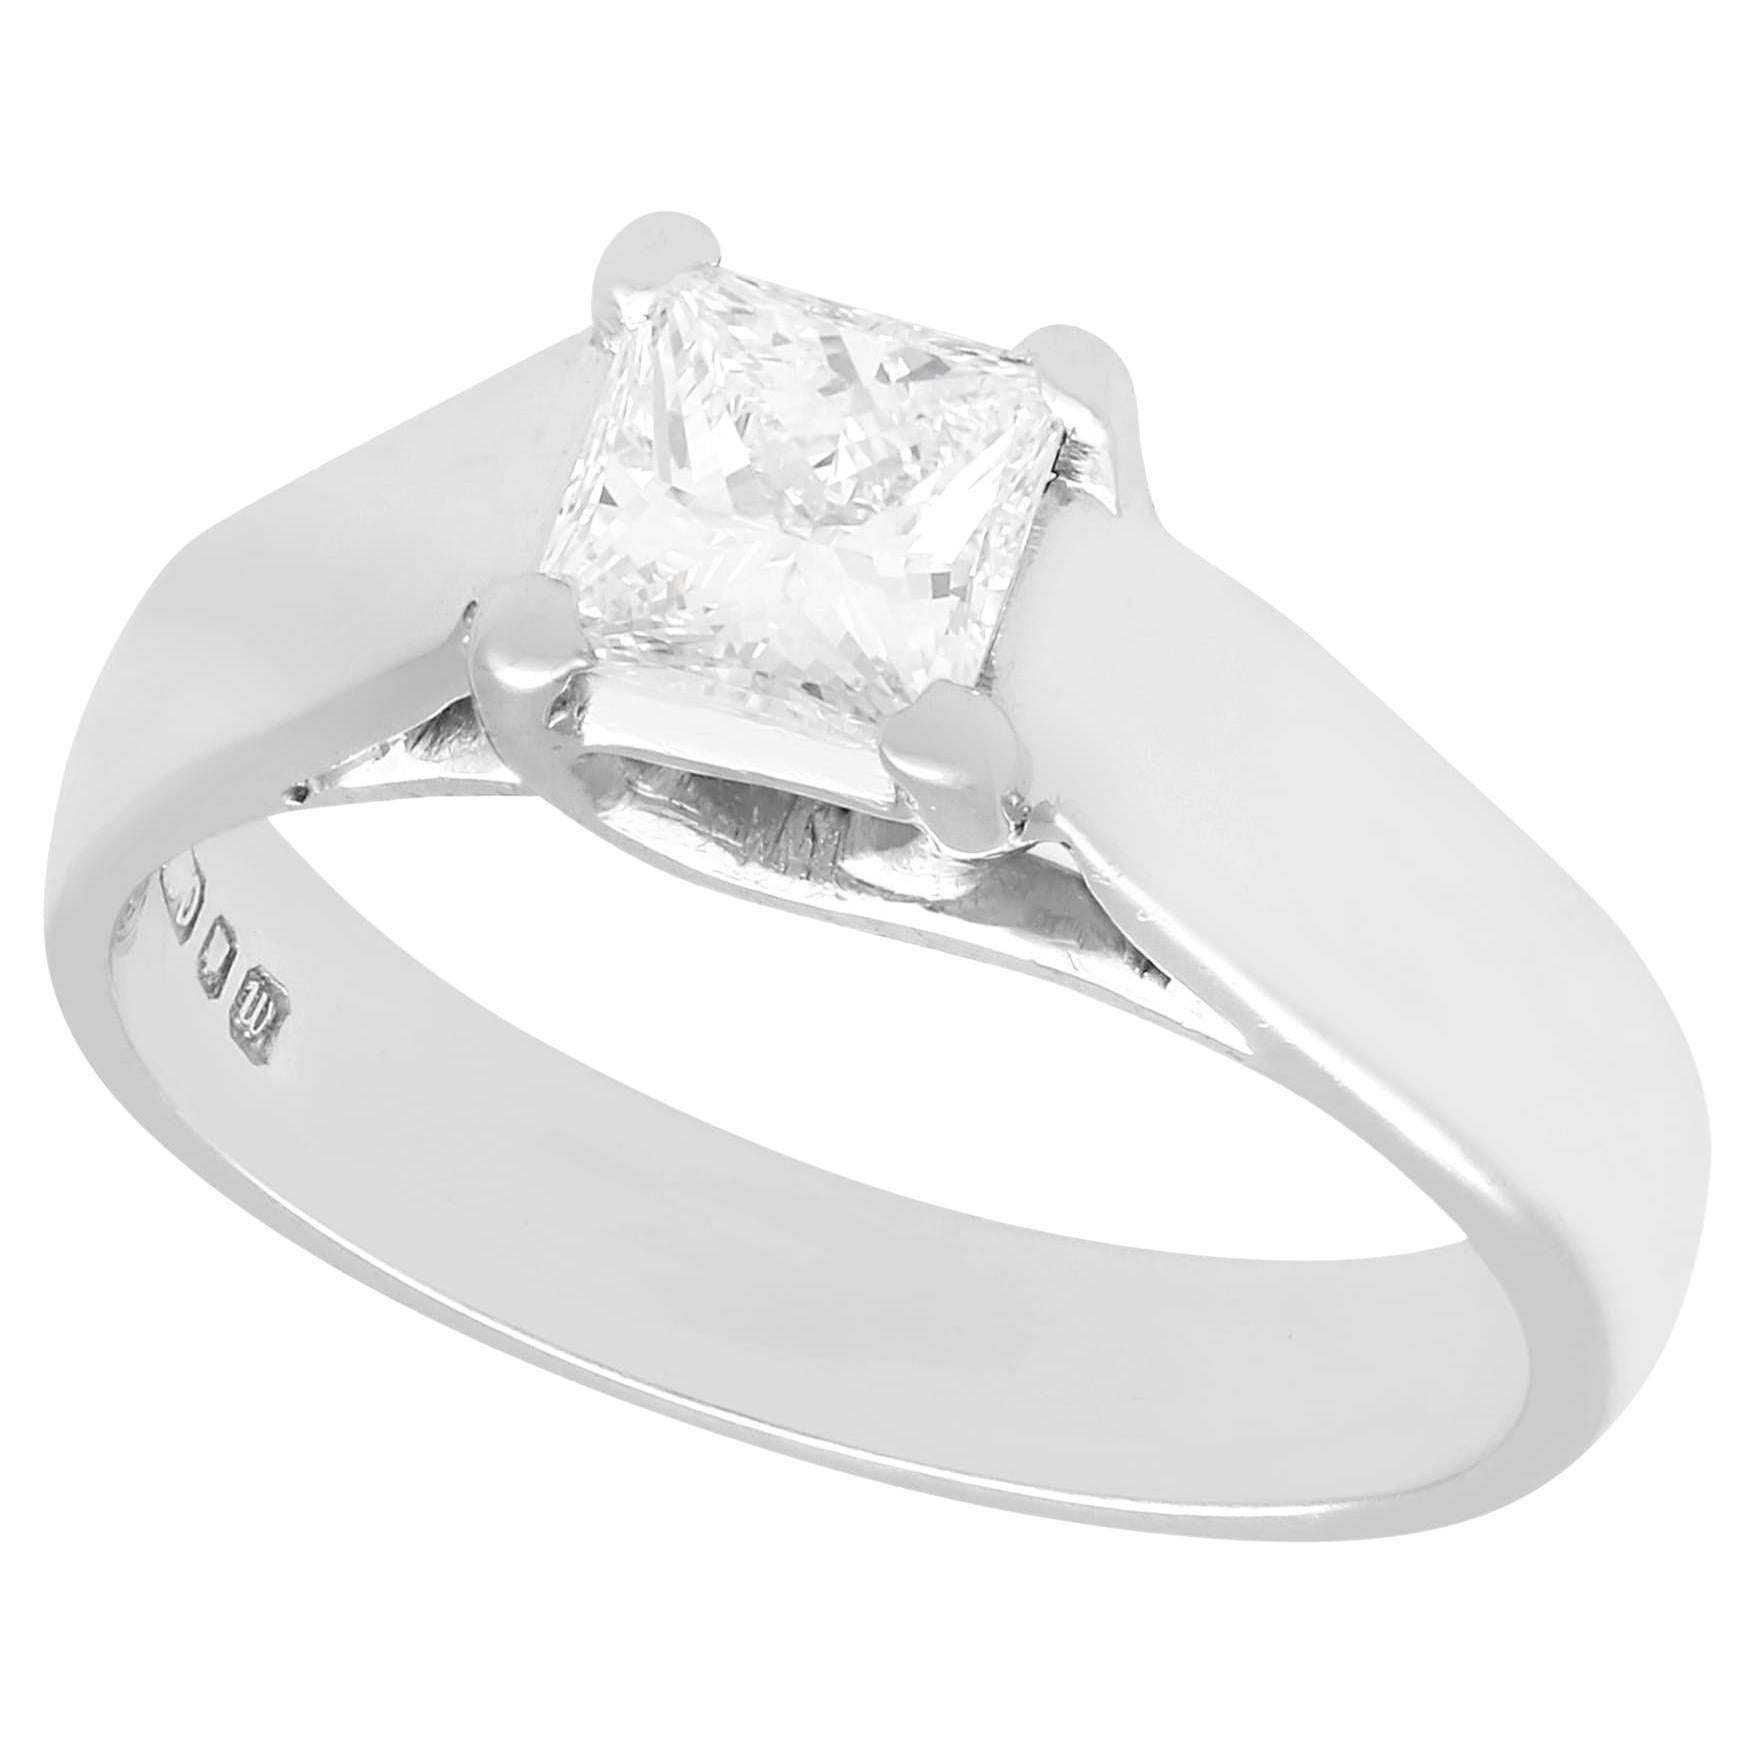 1990s Diamond and White Gold Solitaire Engagement Ring